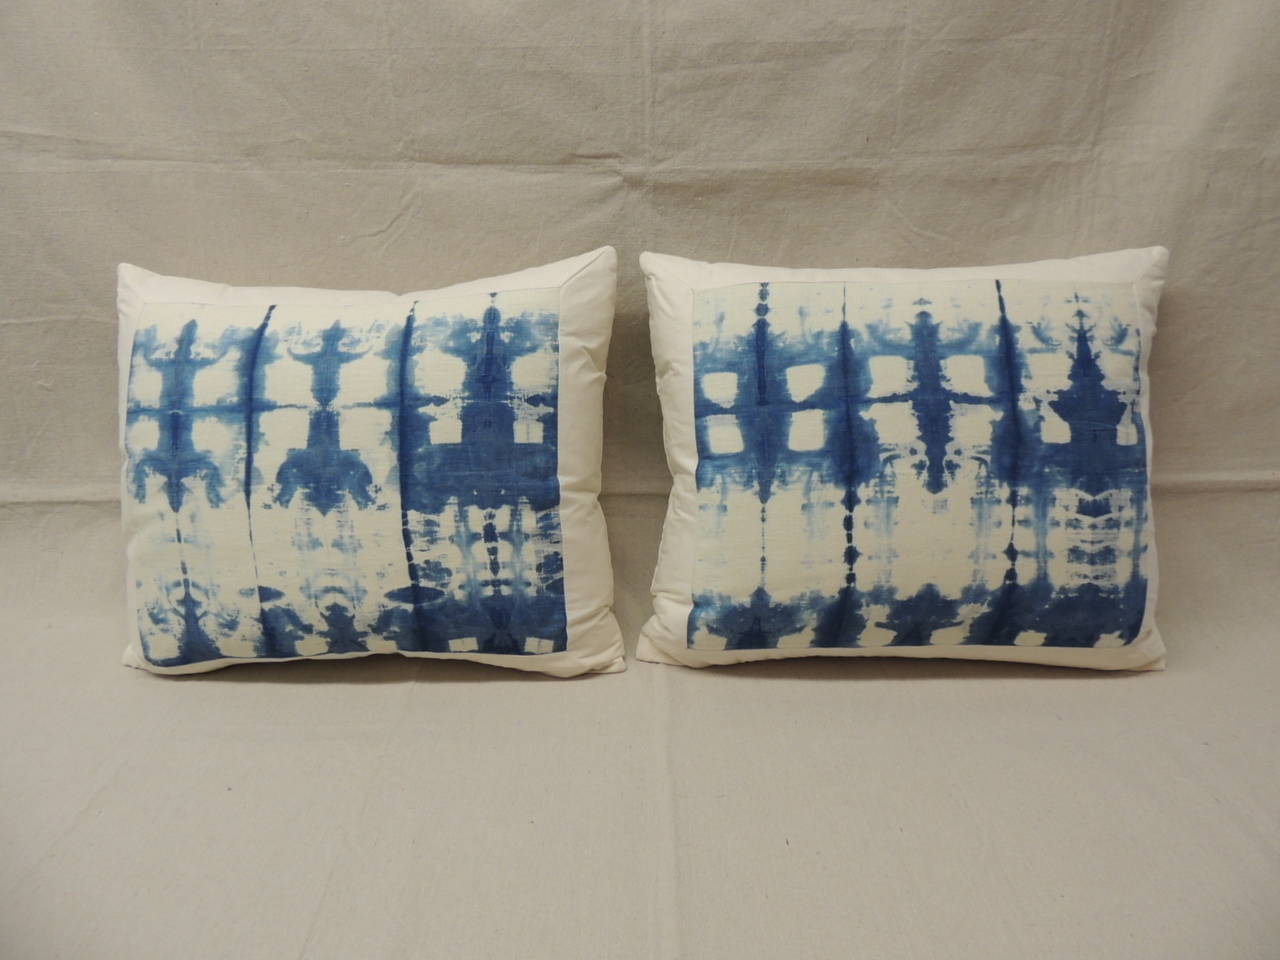 Pair of Japanese Shibori resist dyed blue and white linen pillows. White linen backing.
Decorative pillow handcrafted and designed in the USA. Closure by stitch (no zipper closure) with a custom-made pillow insert.